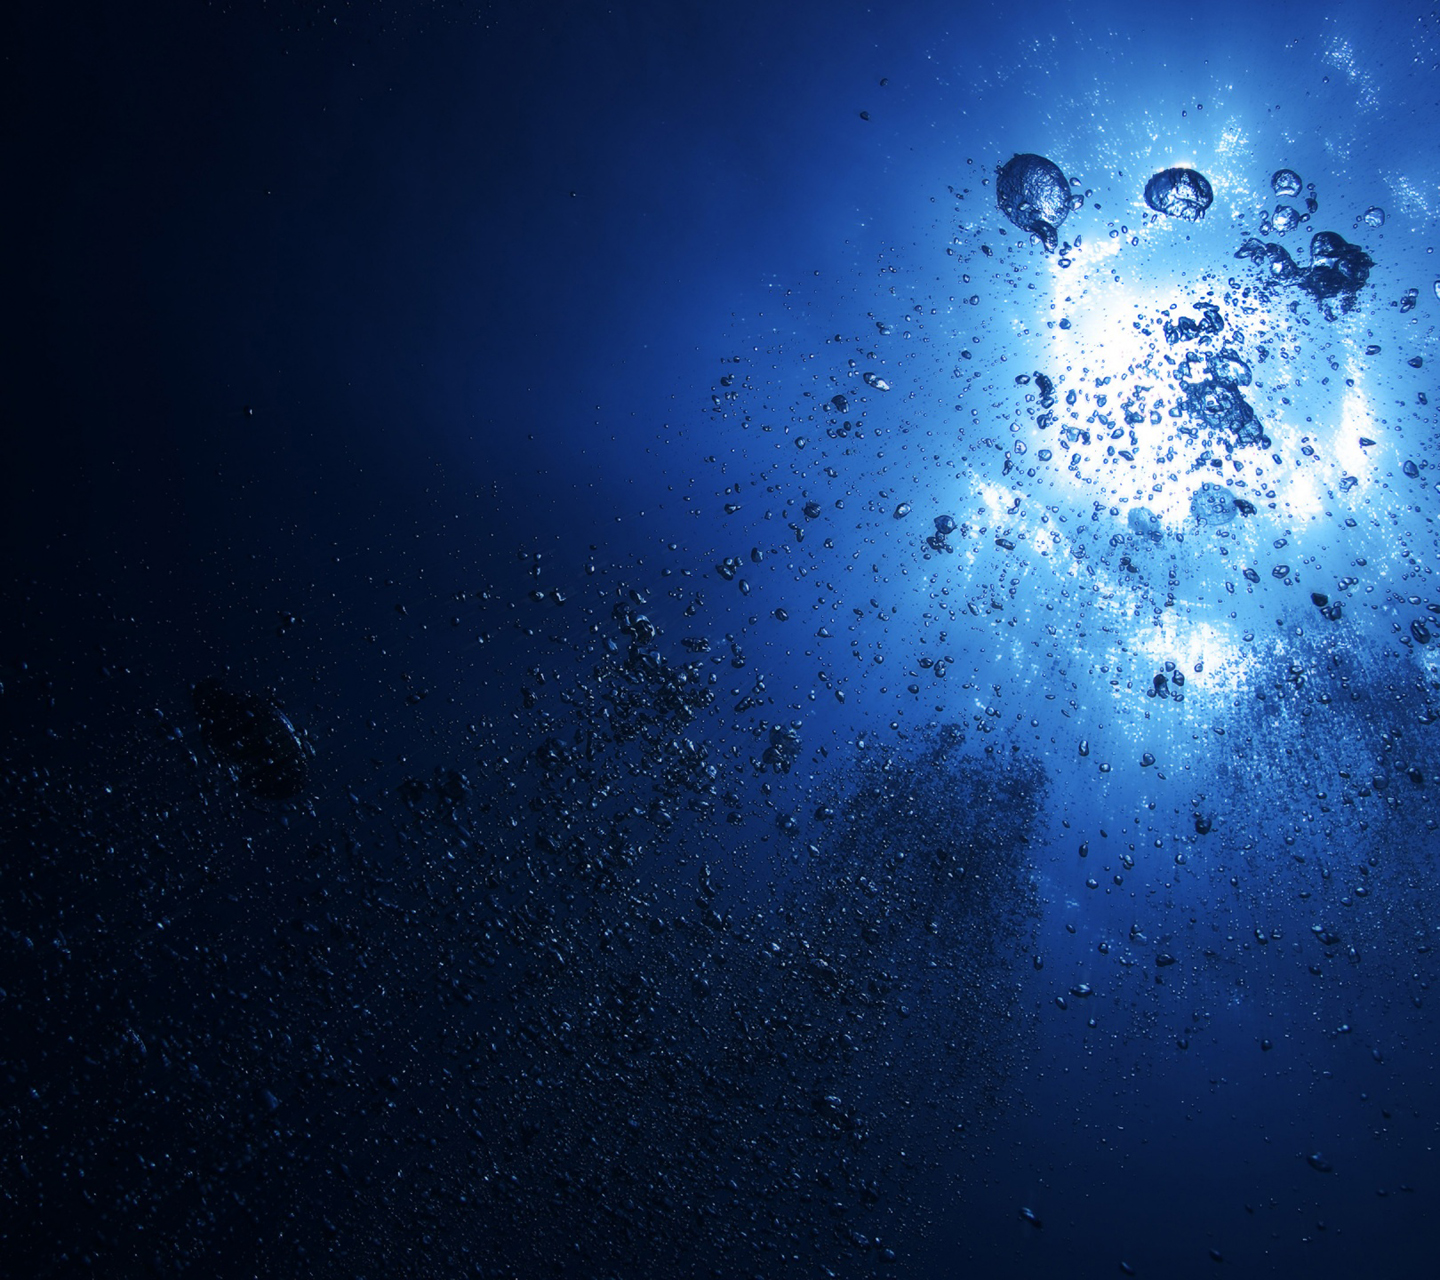 Galaxy S3 Wallpaper - Collapsing Underwater Bubble With Soundwave - HD Wallpaper 